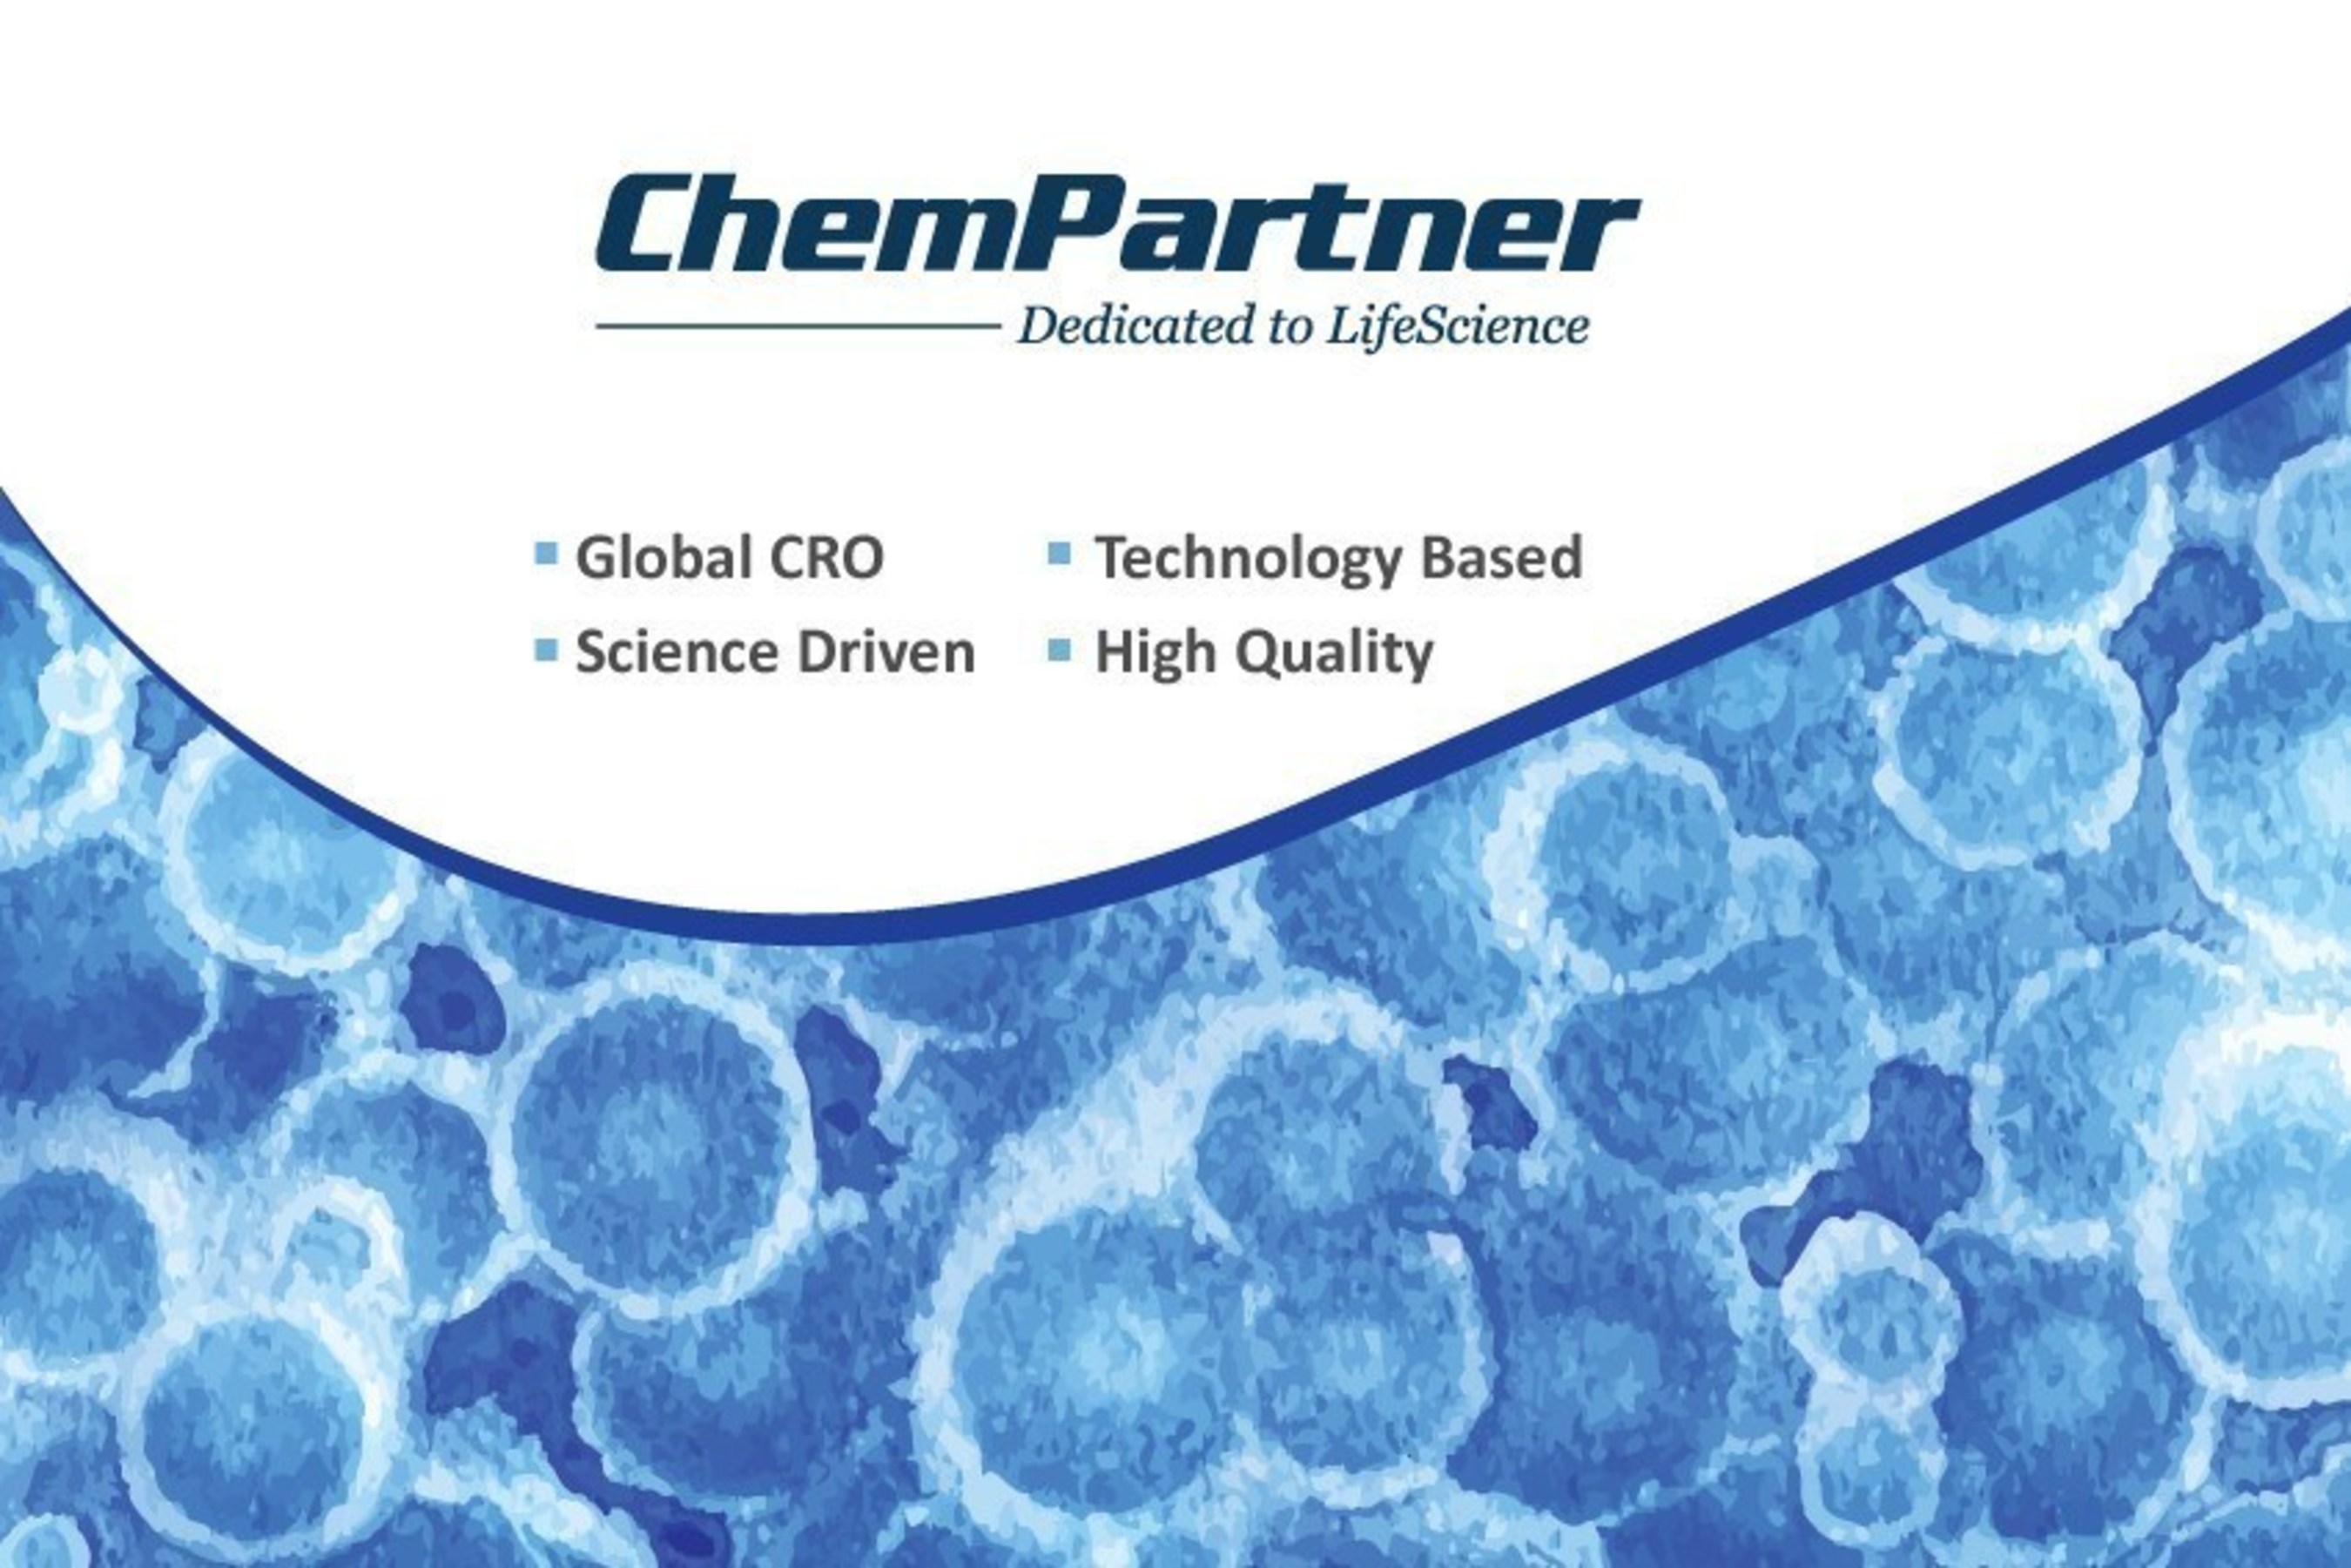 Meet ChemPartner’s Scientists at Booth #1638